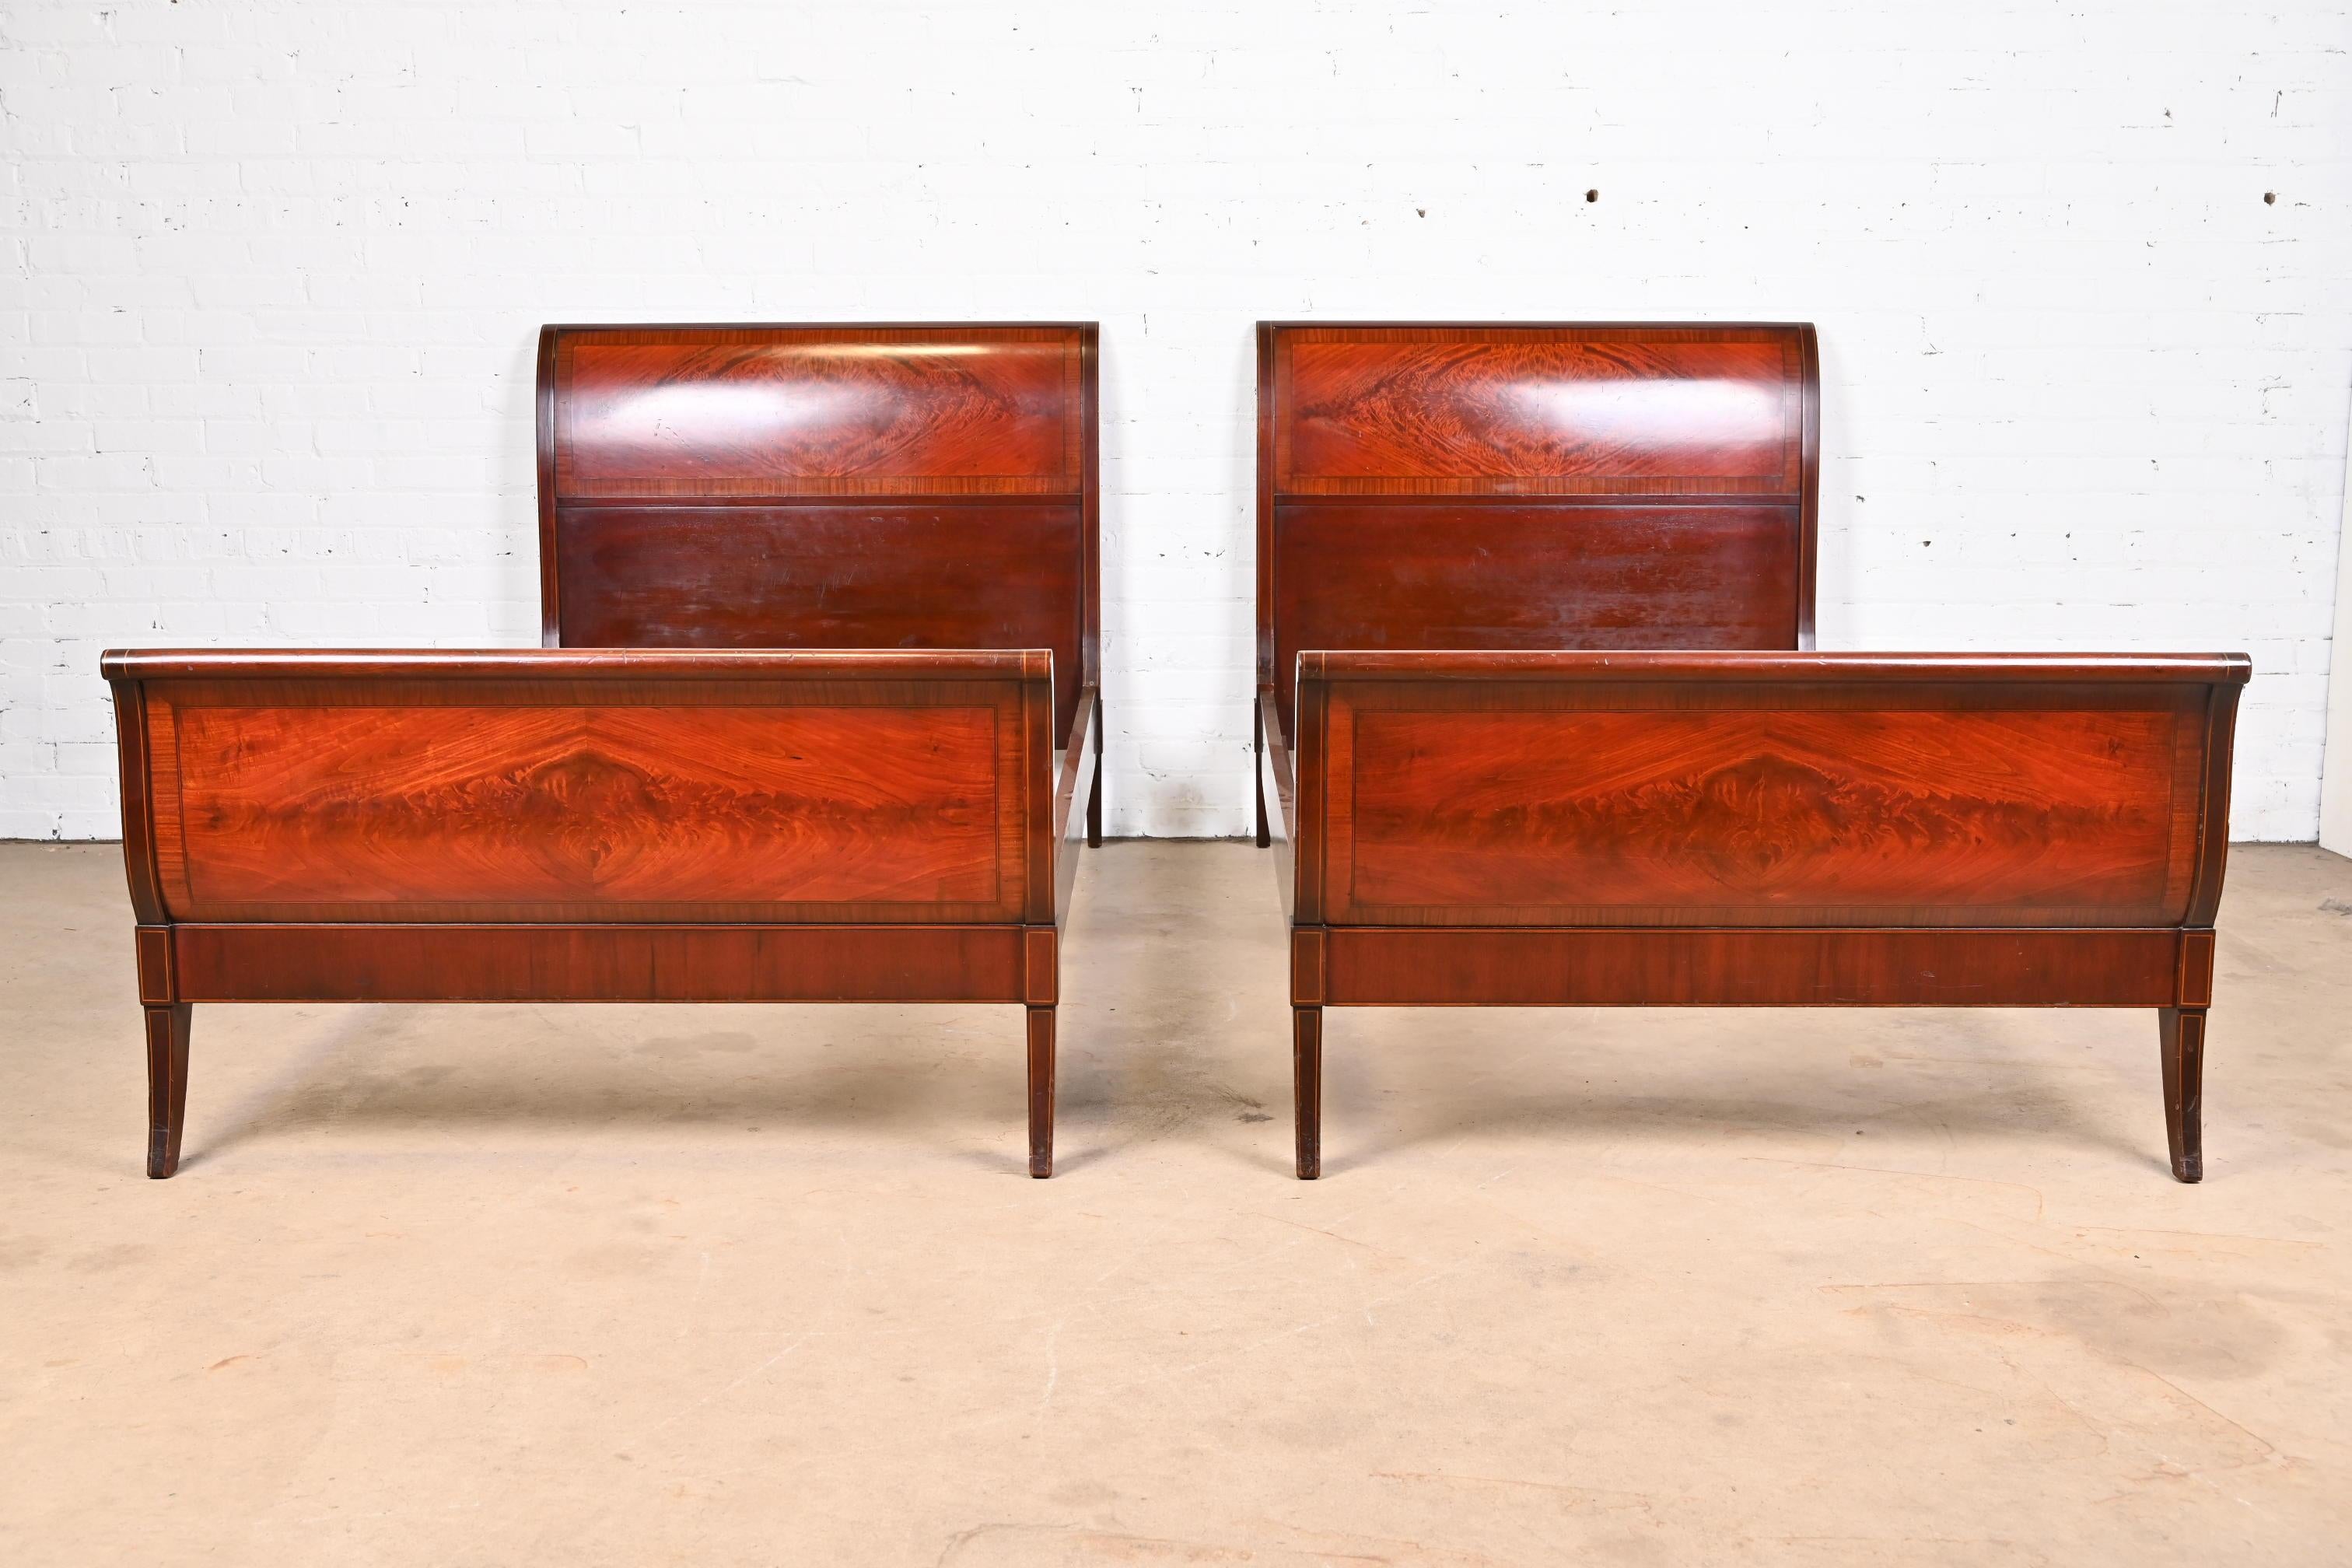 A gorgeous pair of Georgian style twin sleigh beds

Designed by Ralph Widdicomb for John Widdicomb Co.

USA, Circa 1940s

Stunning book-matched flame mahogany, with satinwood string inlay.

Measures: 41.75